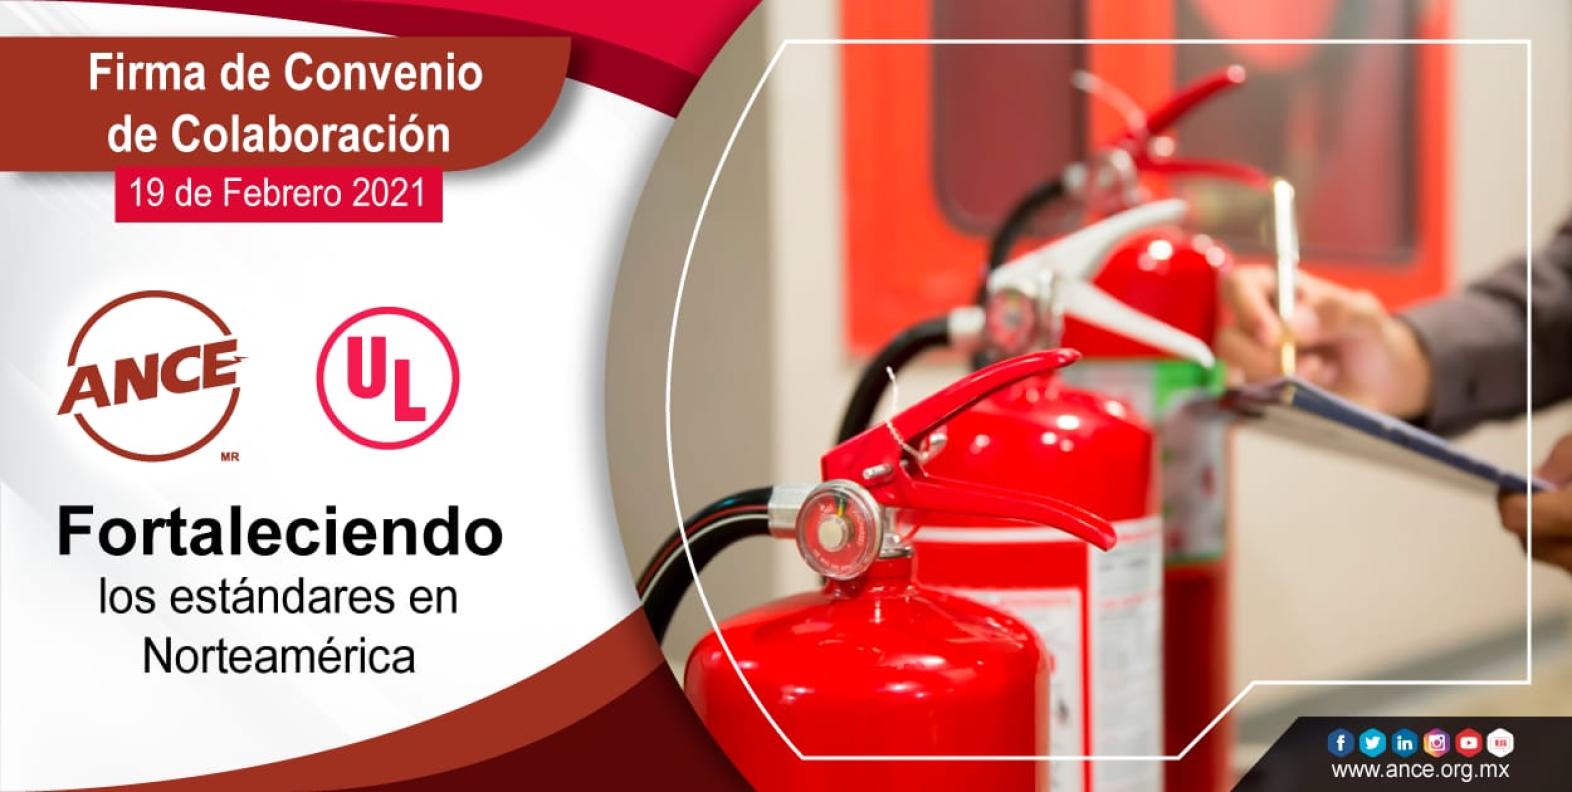 Photo of fire extinguishers and text in Spanish reading "Signature of collaboration agreement strengthening standards in North America"